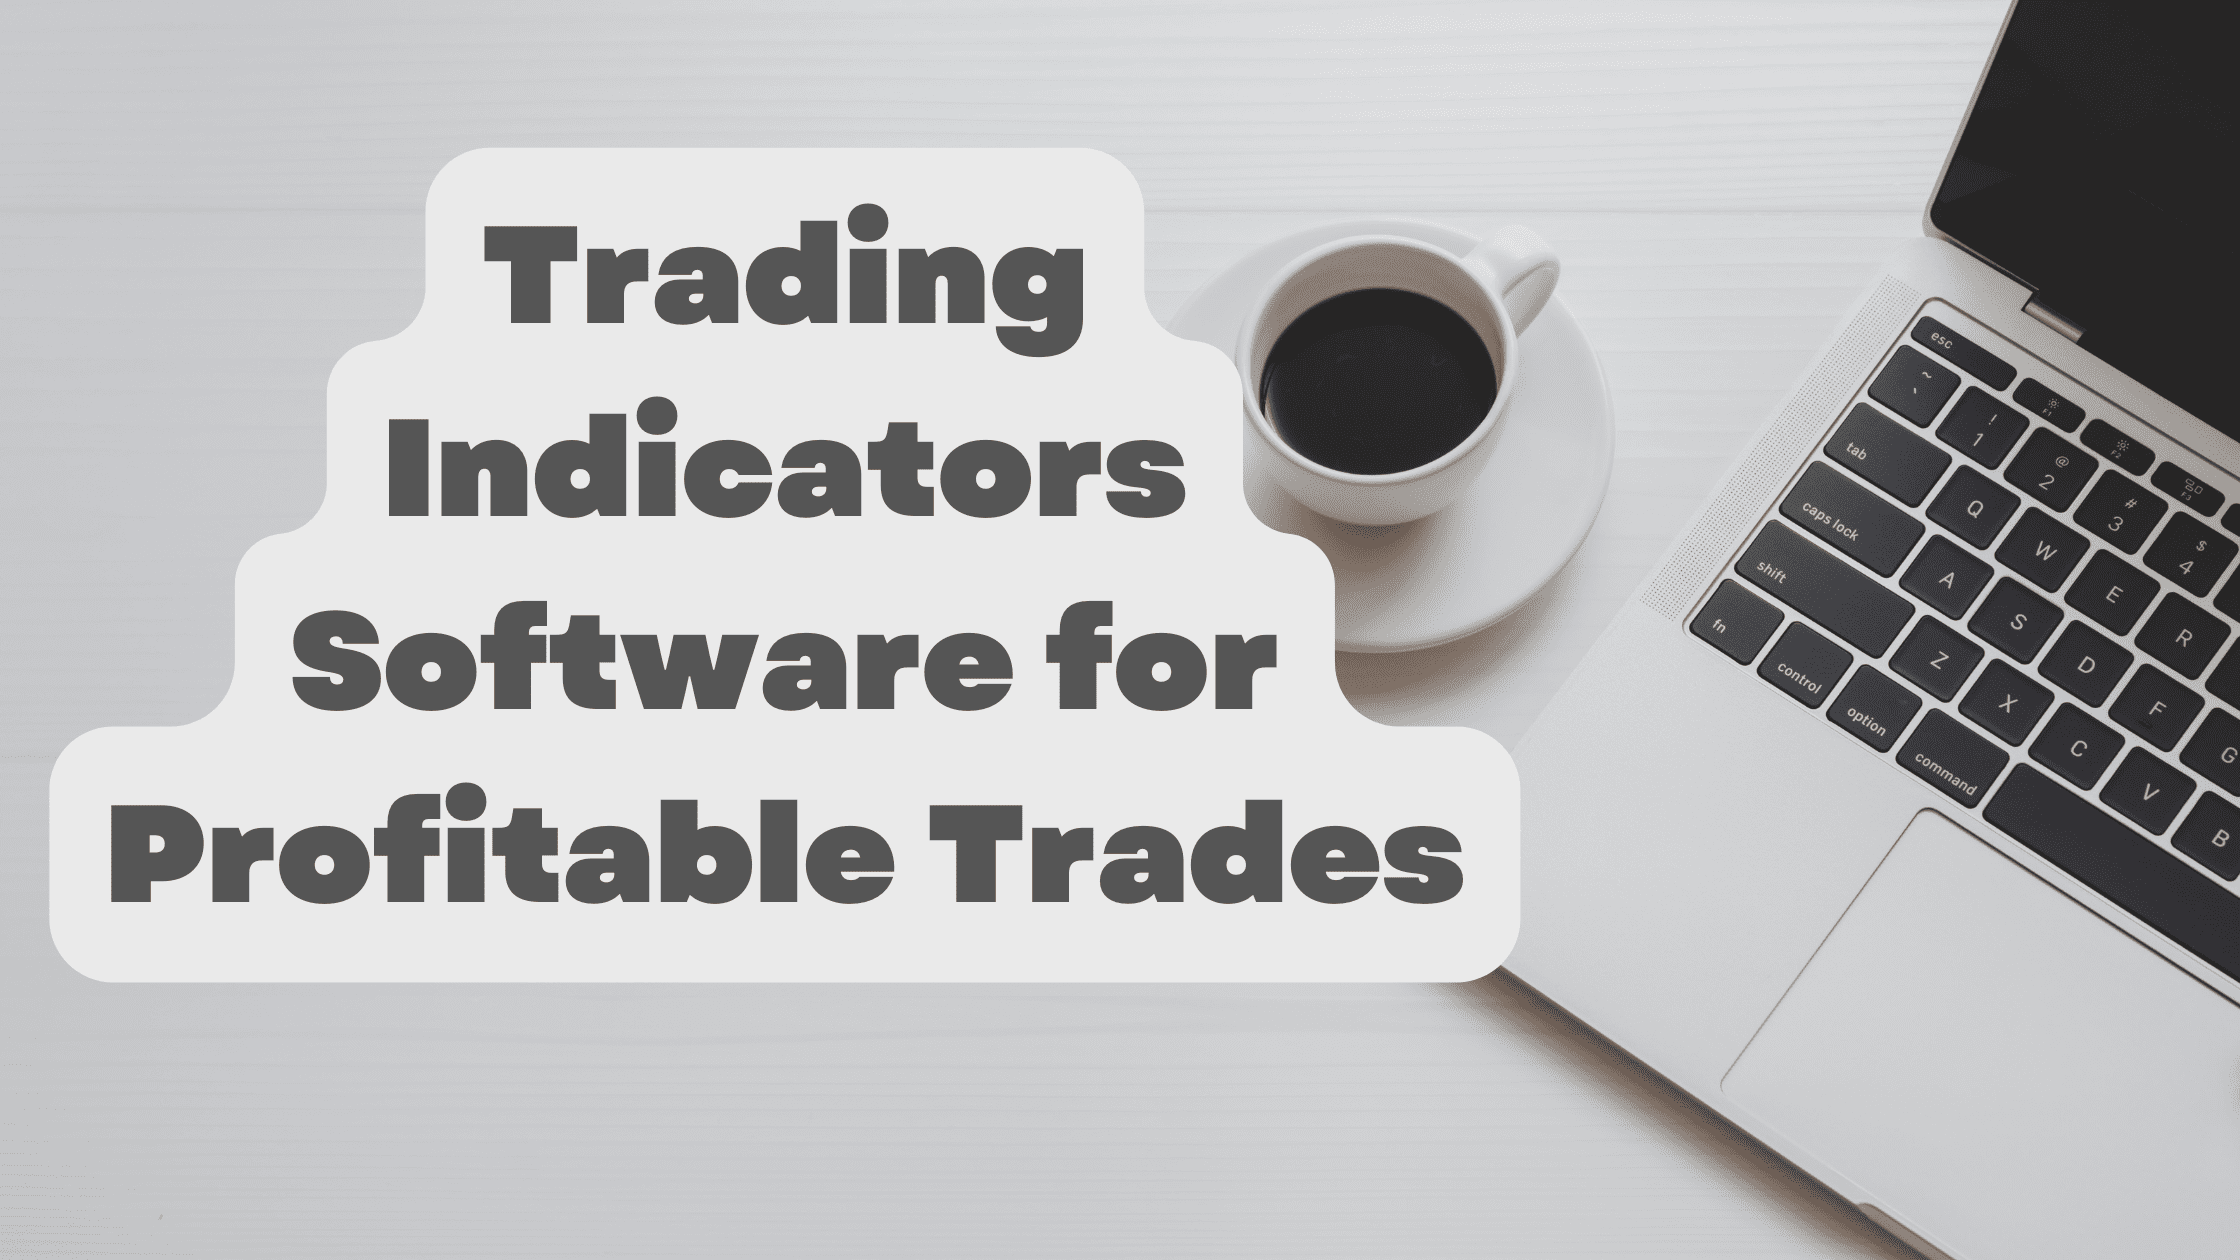 Trading Indicators Software For Profitable Trades